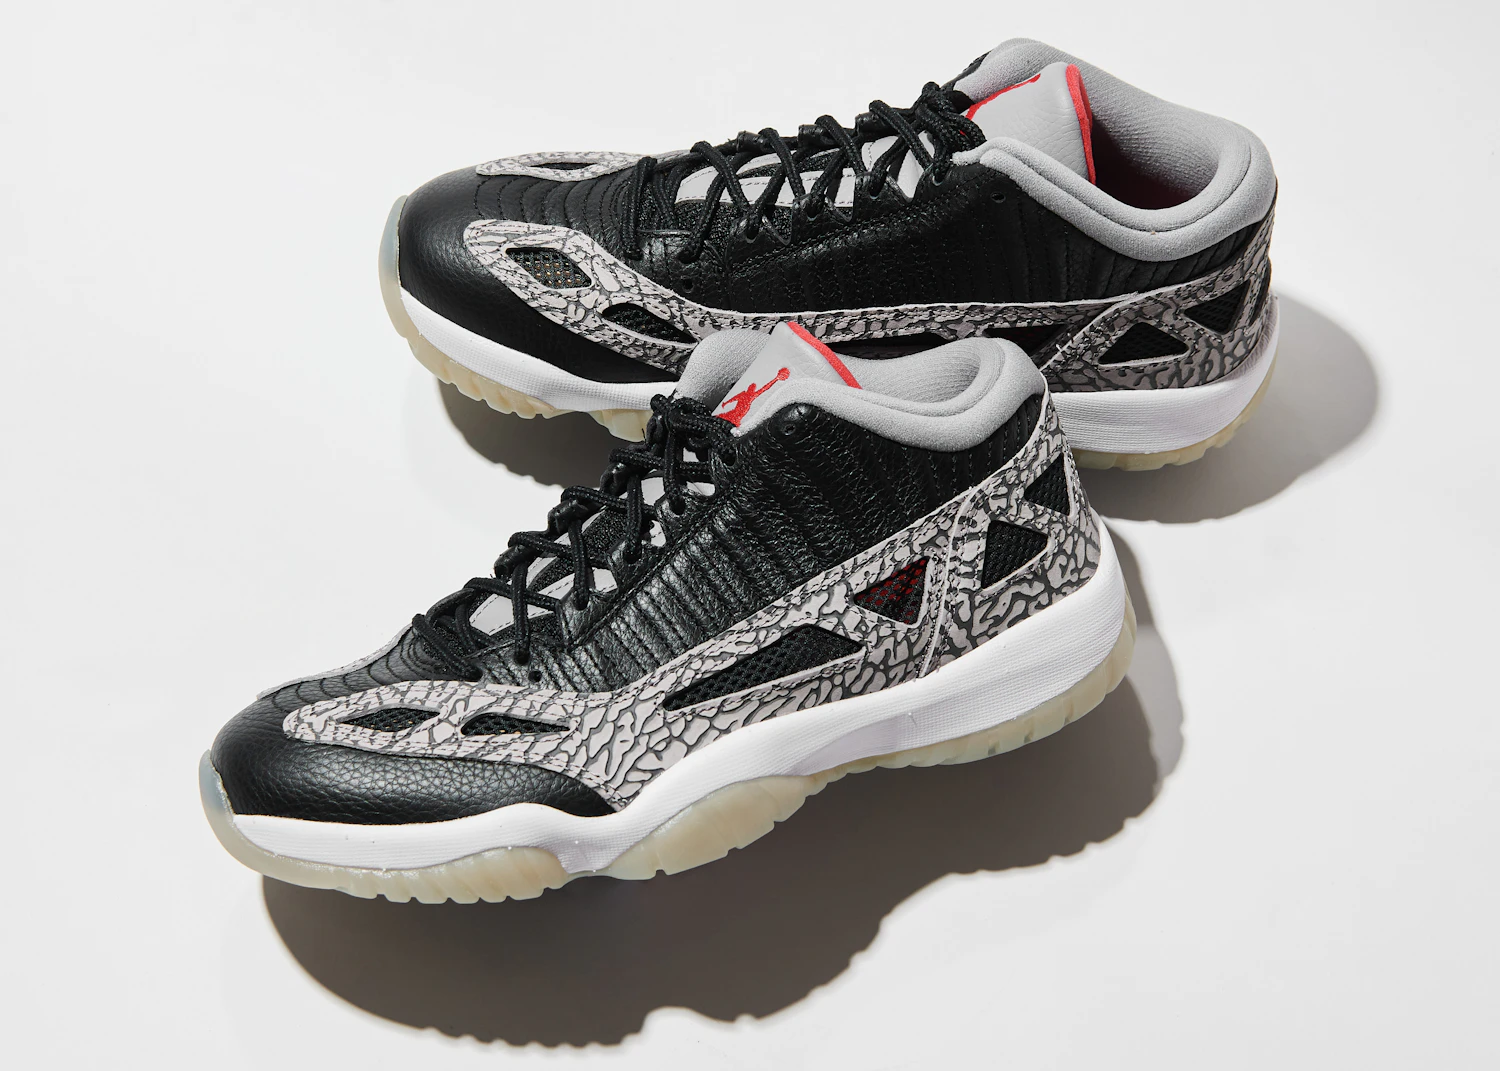 The Air Jordan 11 is unique because the low-cut model, developed for off-court use, had a visual different from the high-cut model. It adopted a structure that incorporated mesh parts layered over shrink leather and nubuck. This model was influenced by the colors of the Air Jordan 3 Retro. 29,700 yen (tax included)